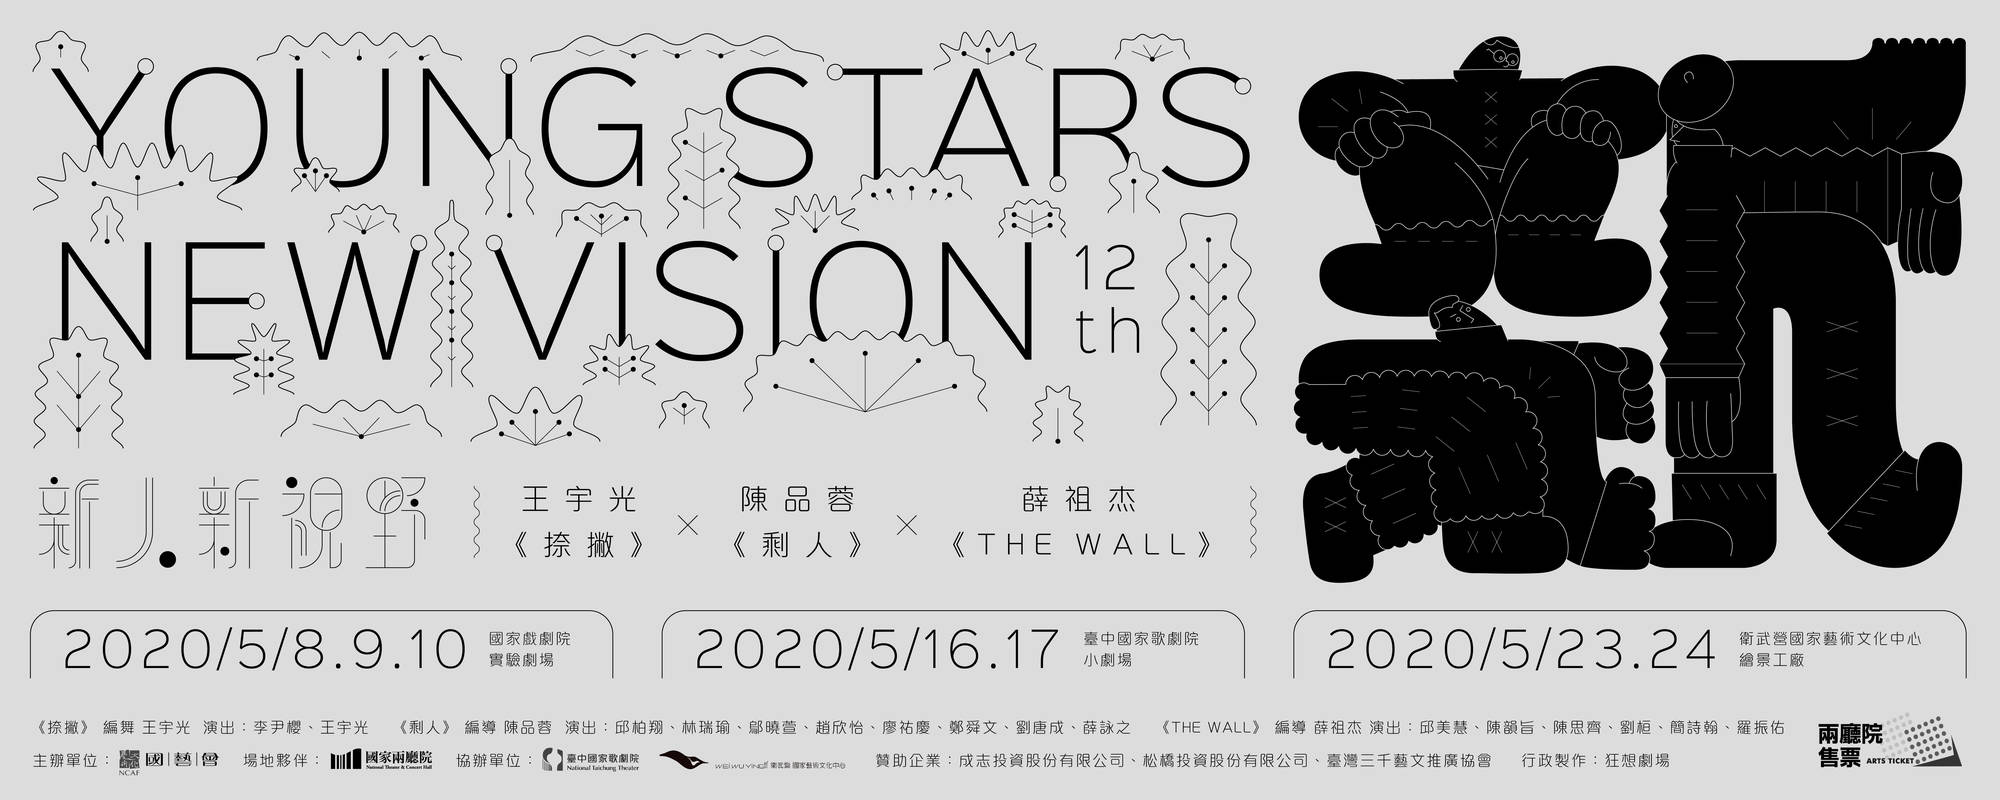 12th YOUNG STARS NEW VISION 